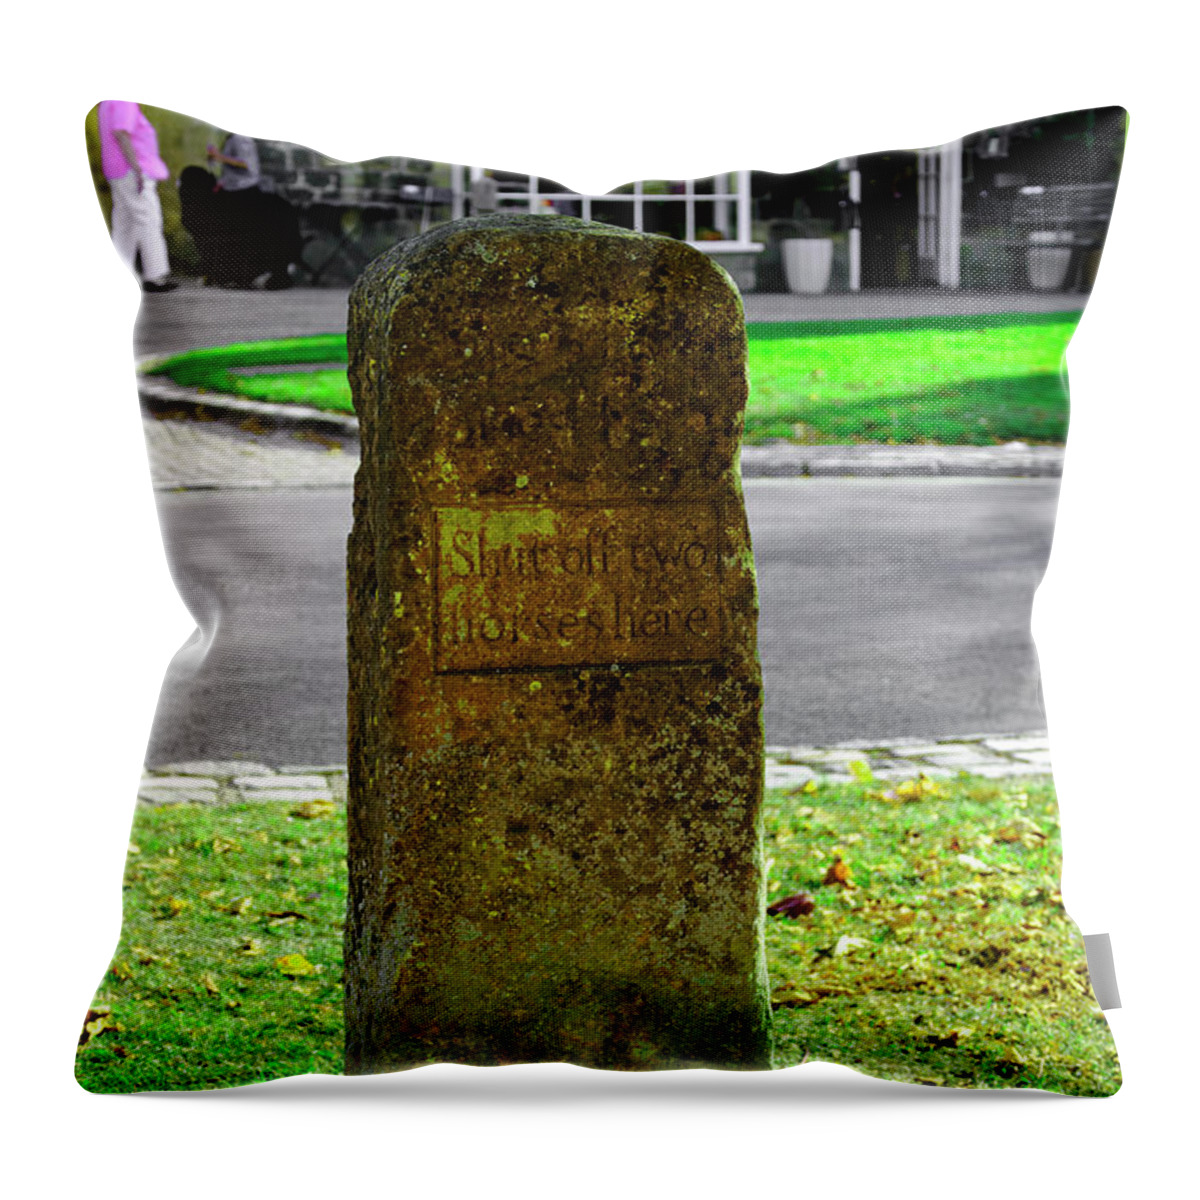 Europe Throw Pillow featuring the photograph Stone for Shutting Off Two Horses - Broadway by Rod Johnson